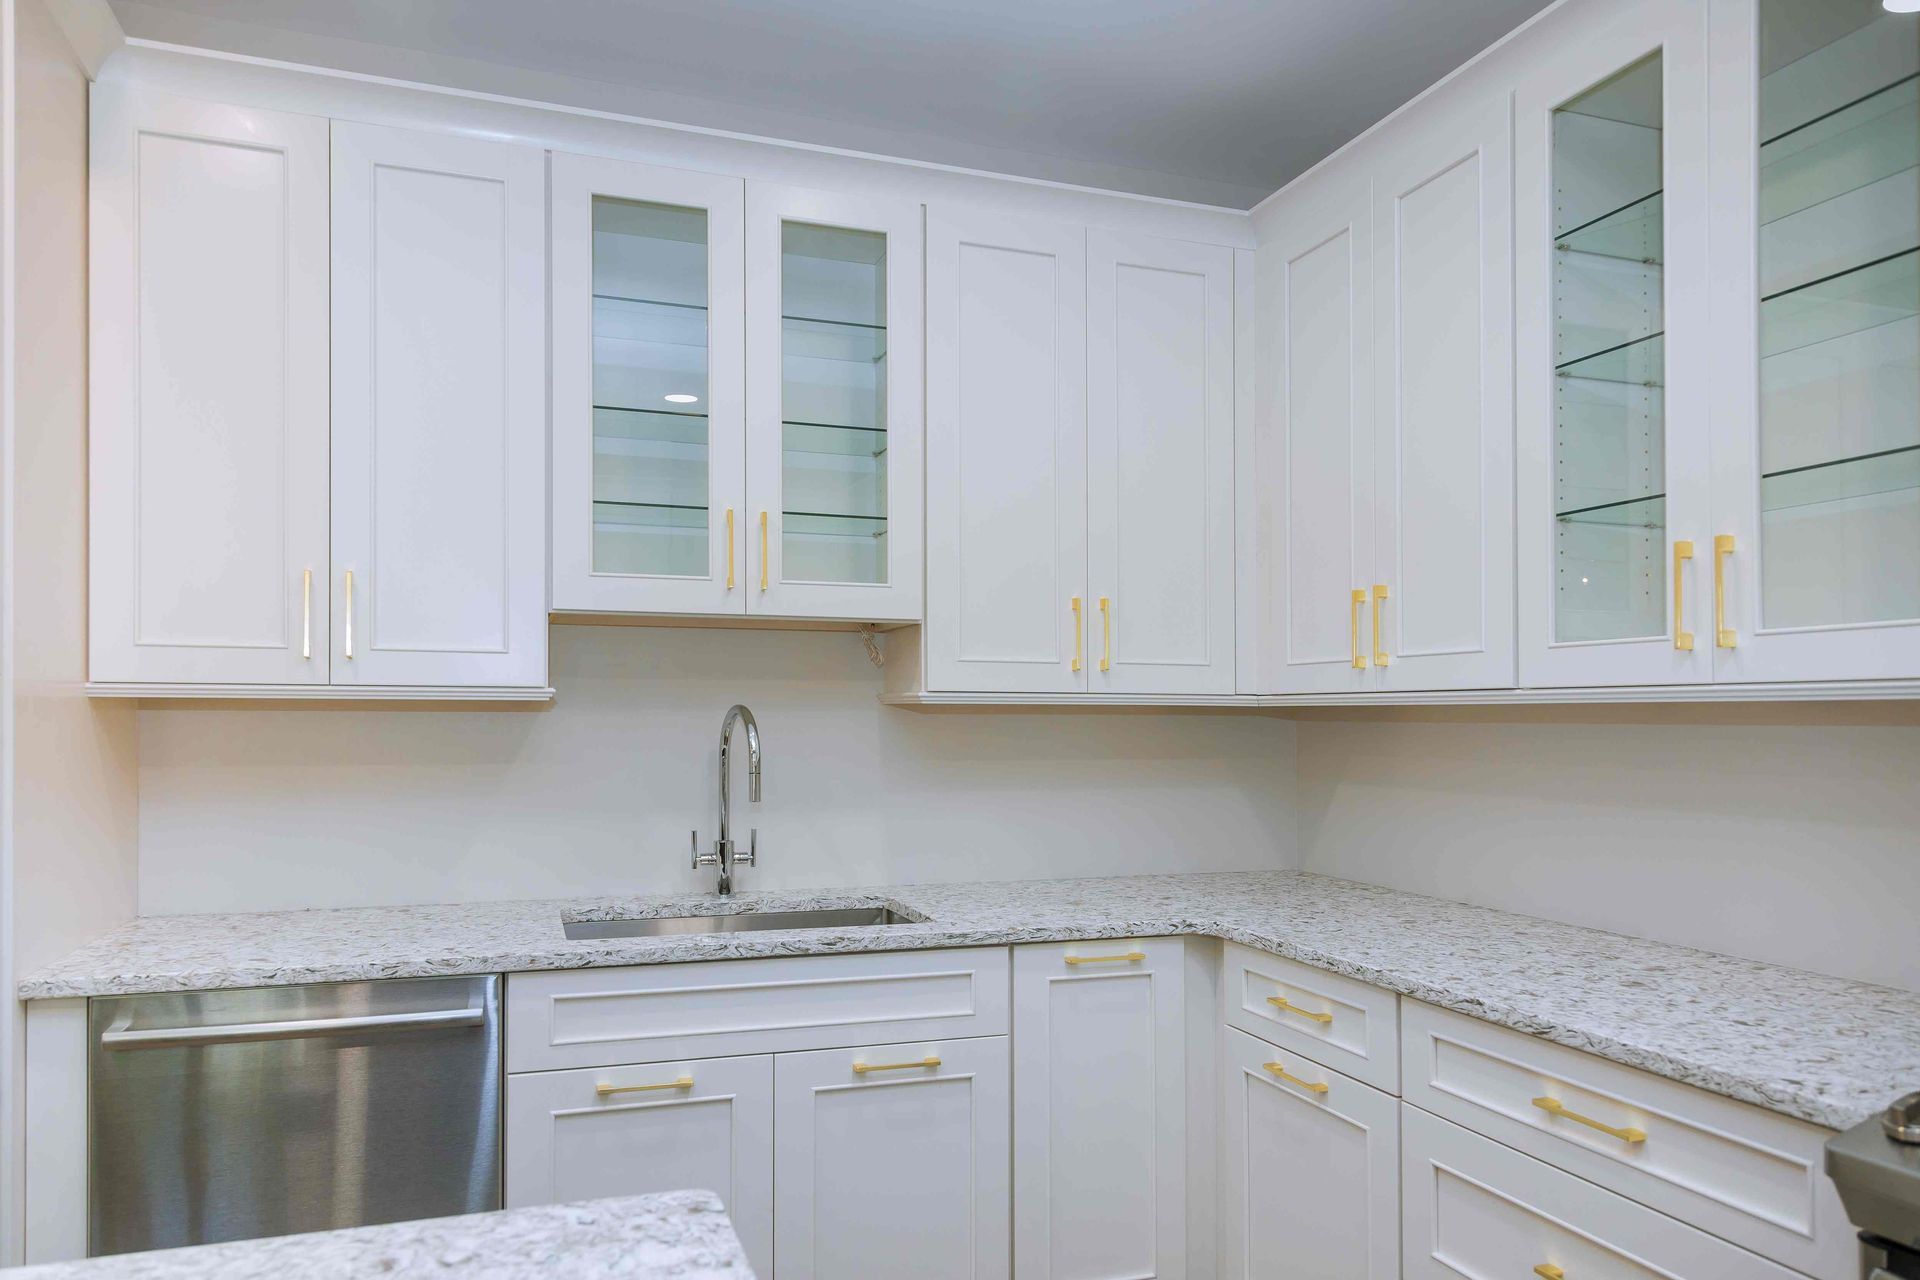 White custom cabinetry with glass fronts